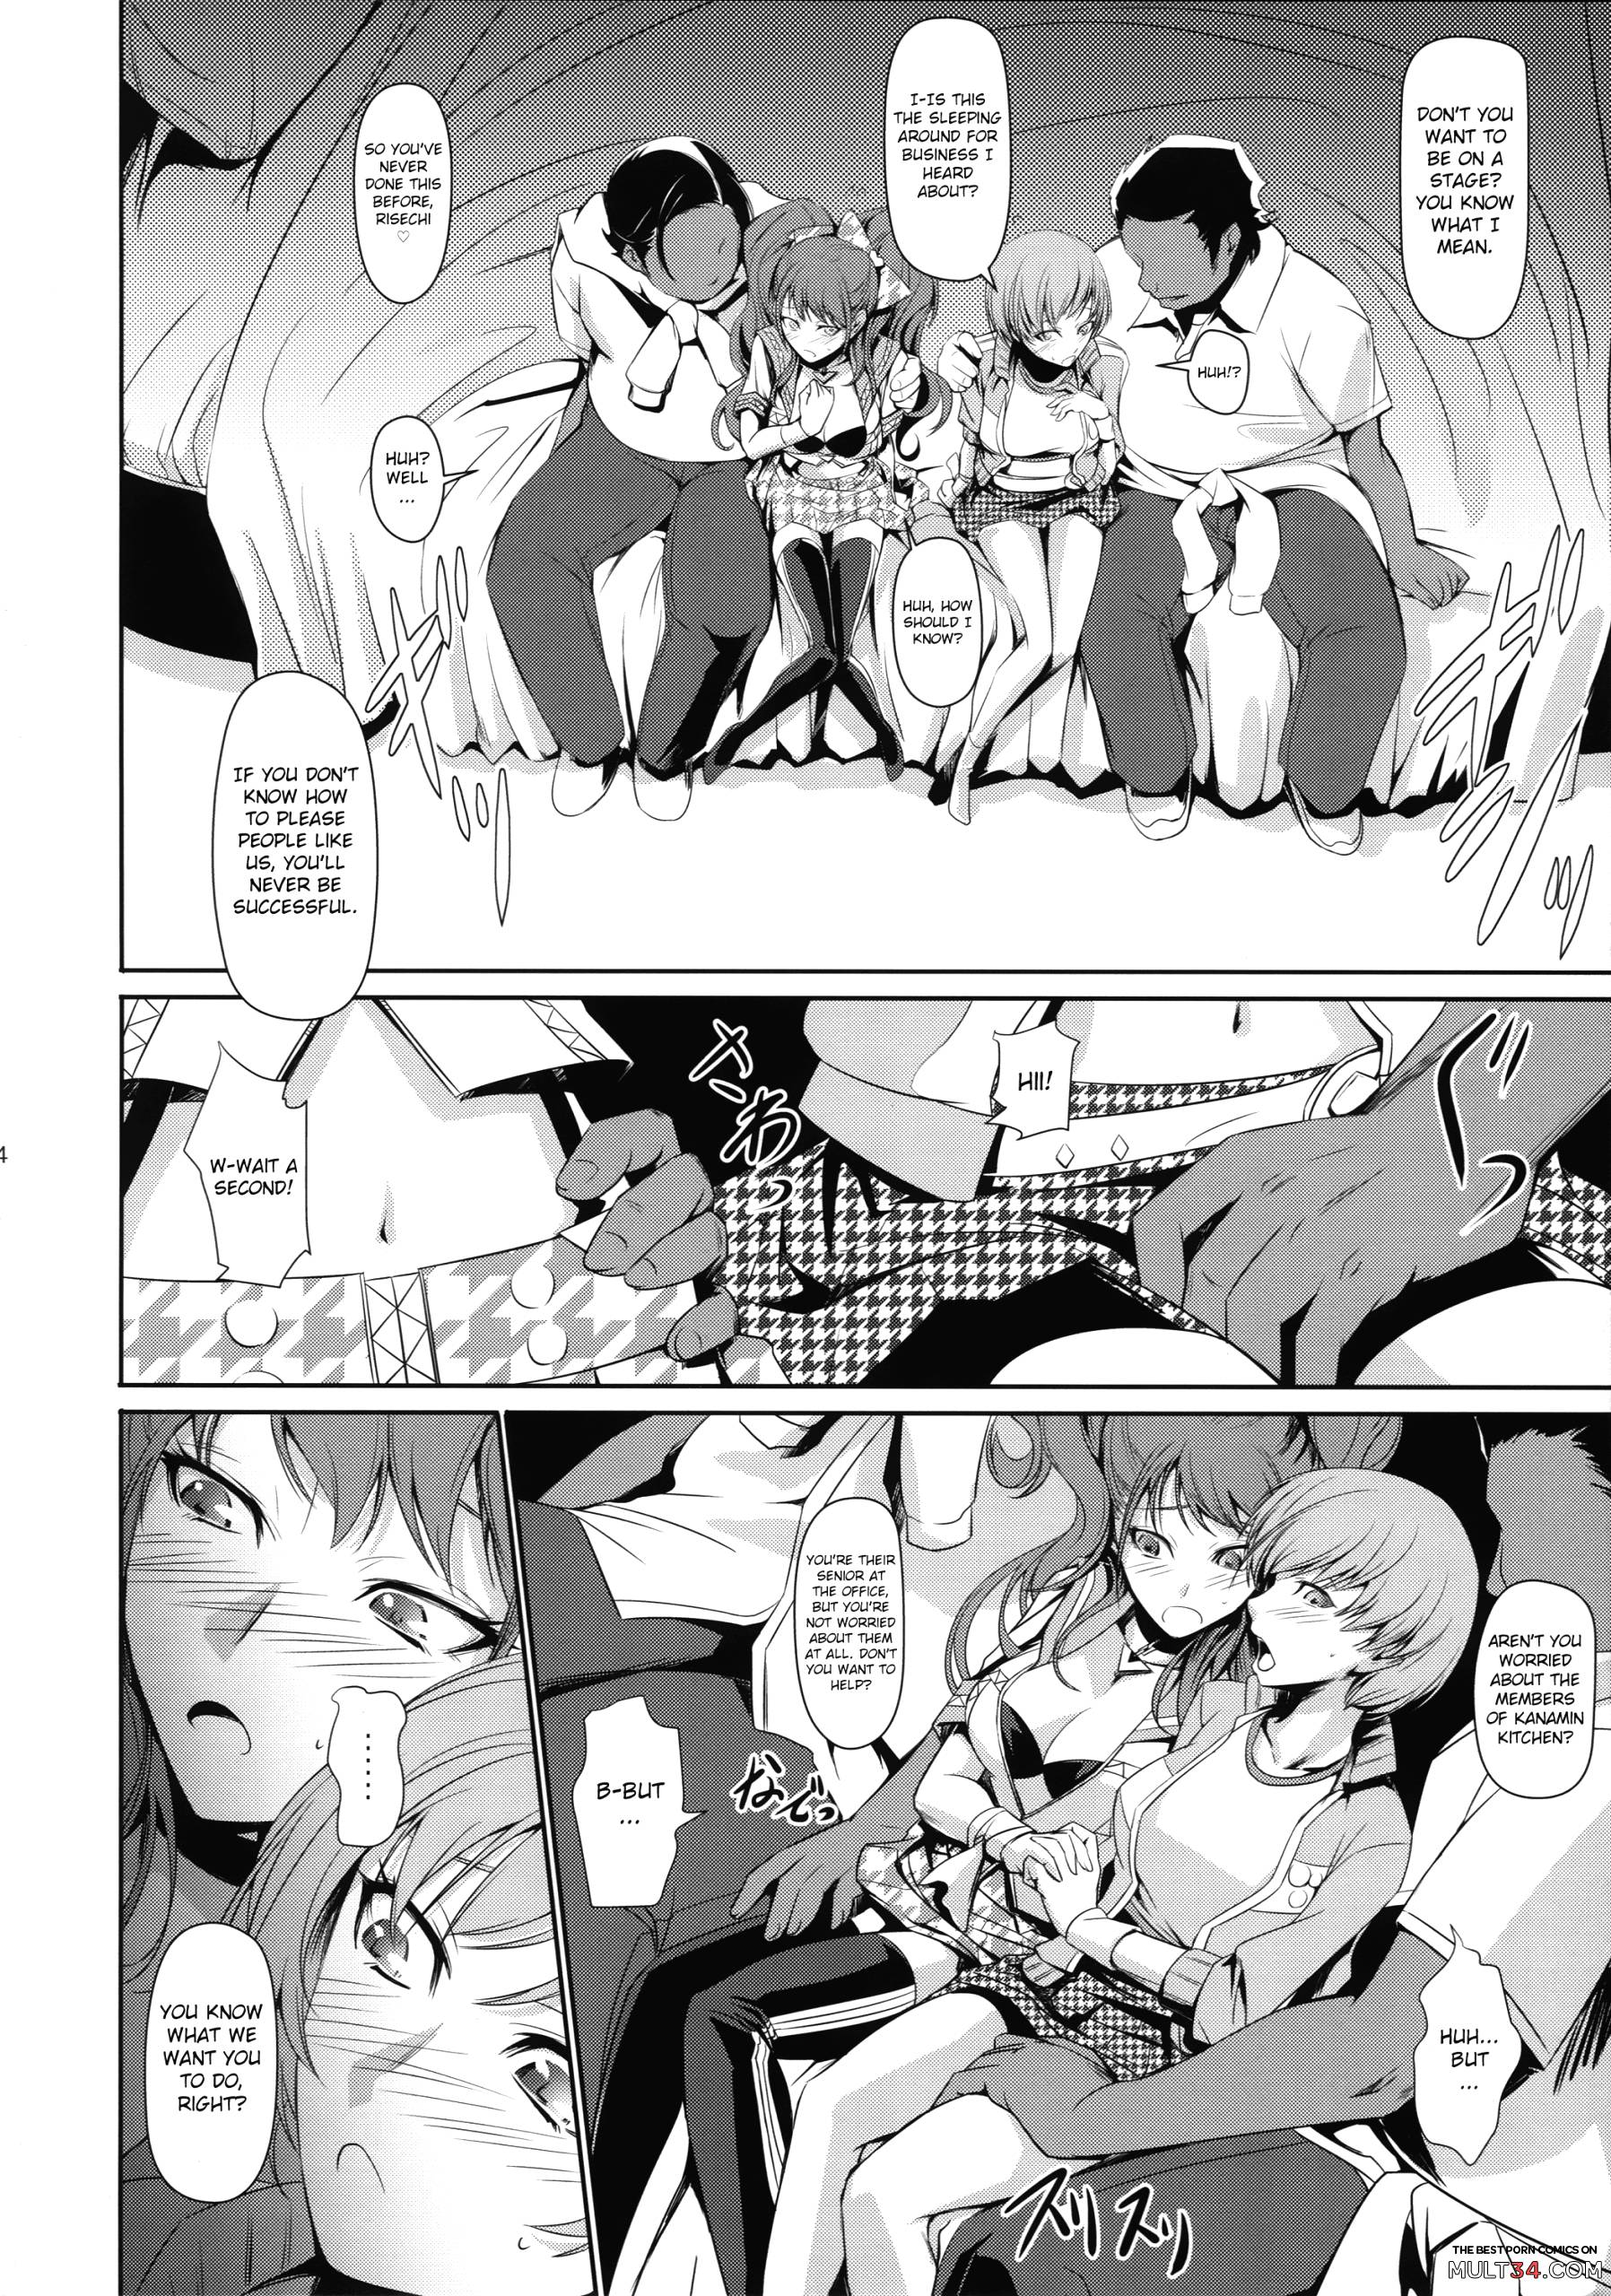 Rise Chie page 4